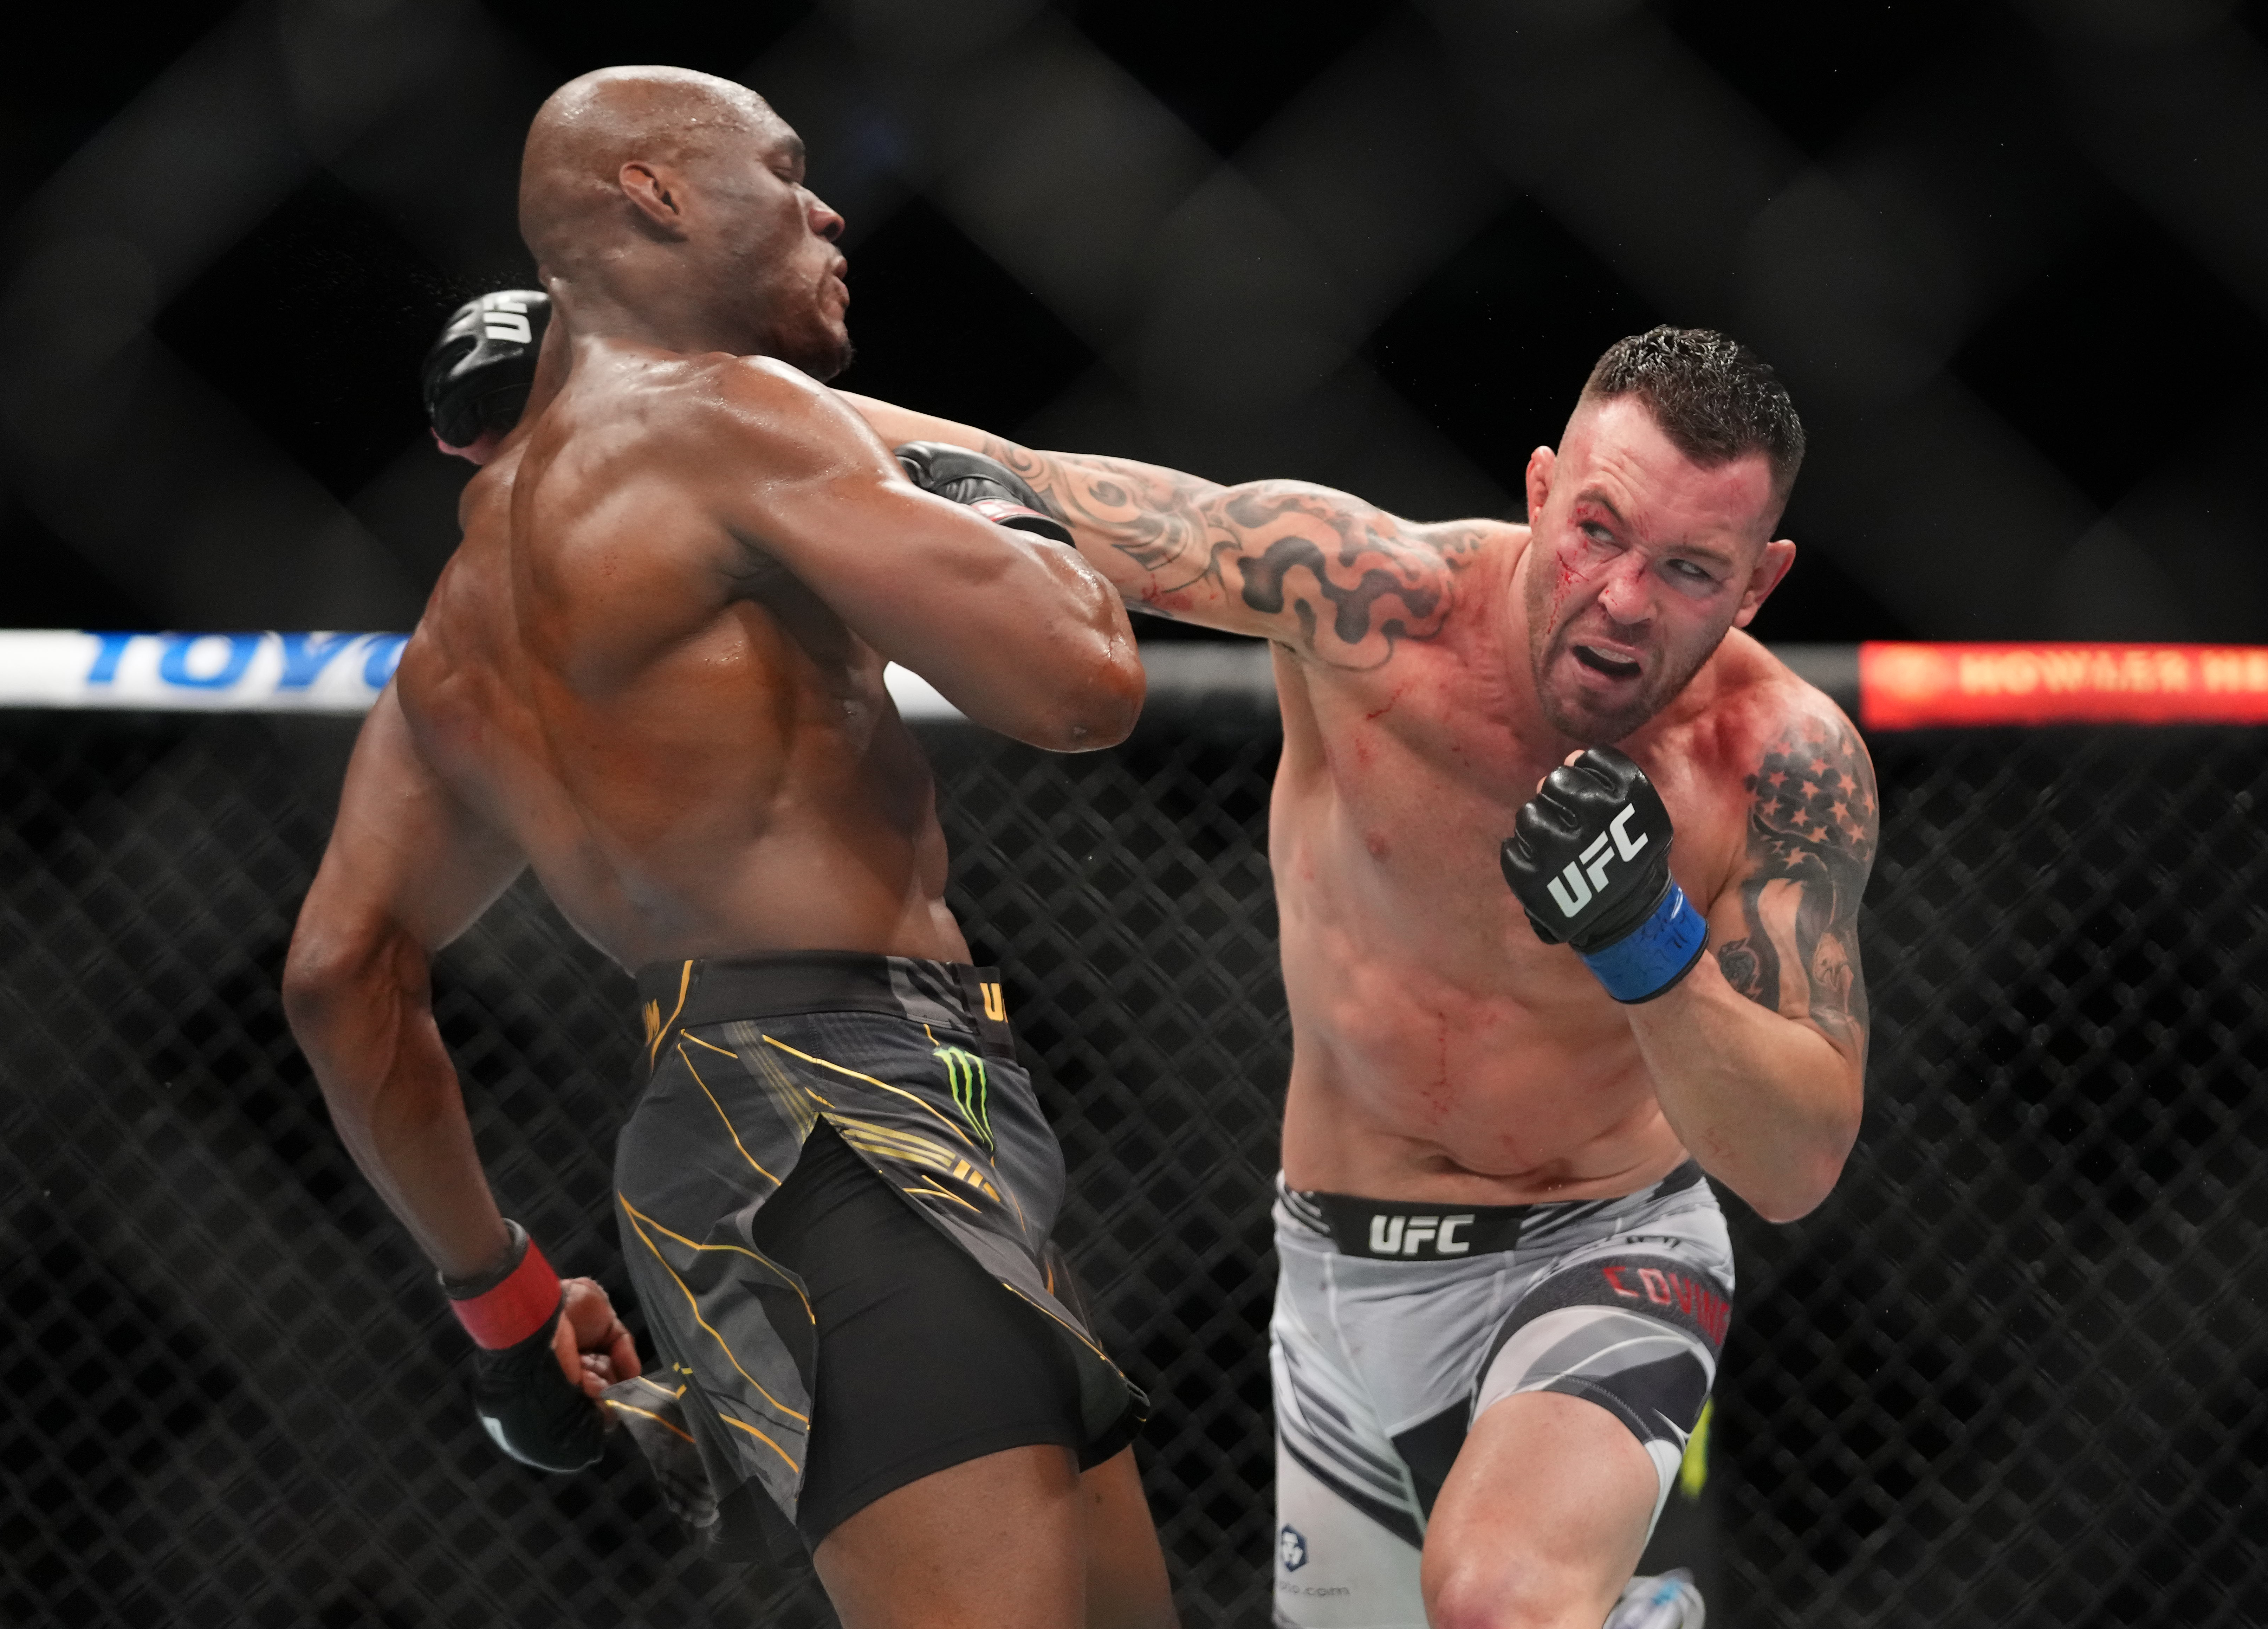 Colby Covington punches Kamaru Usman of Nigeria in their UFC welterweight championship fight during the UFC 268 event at Madison Square Garden on November 06, 2021 in New York City.